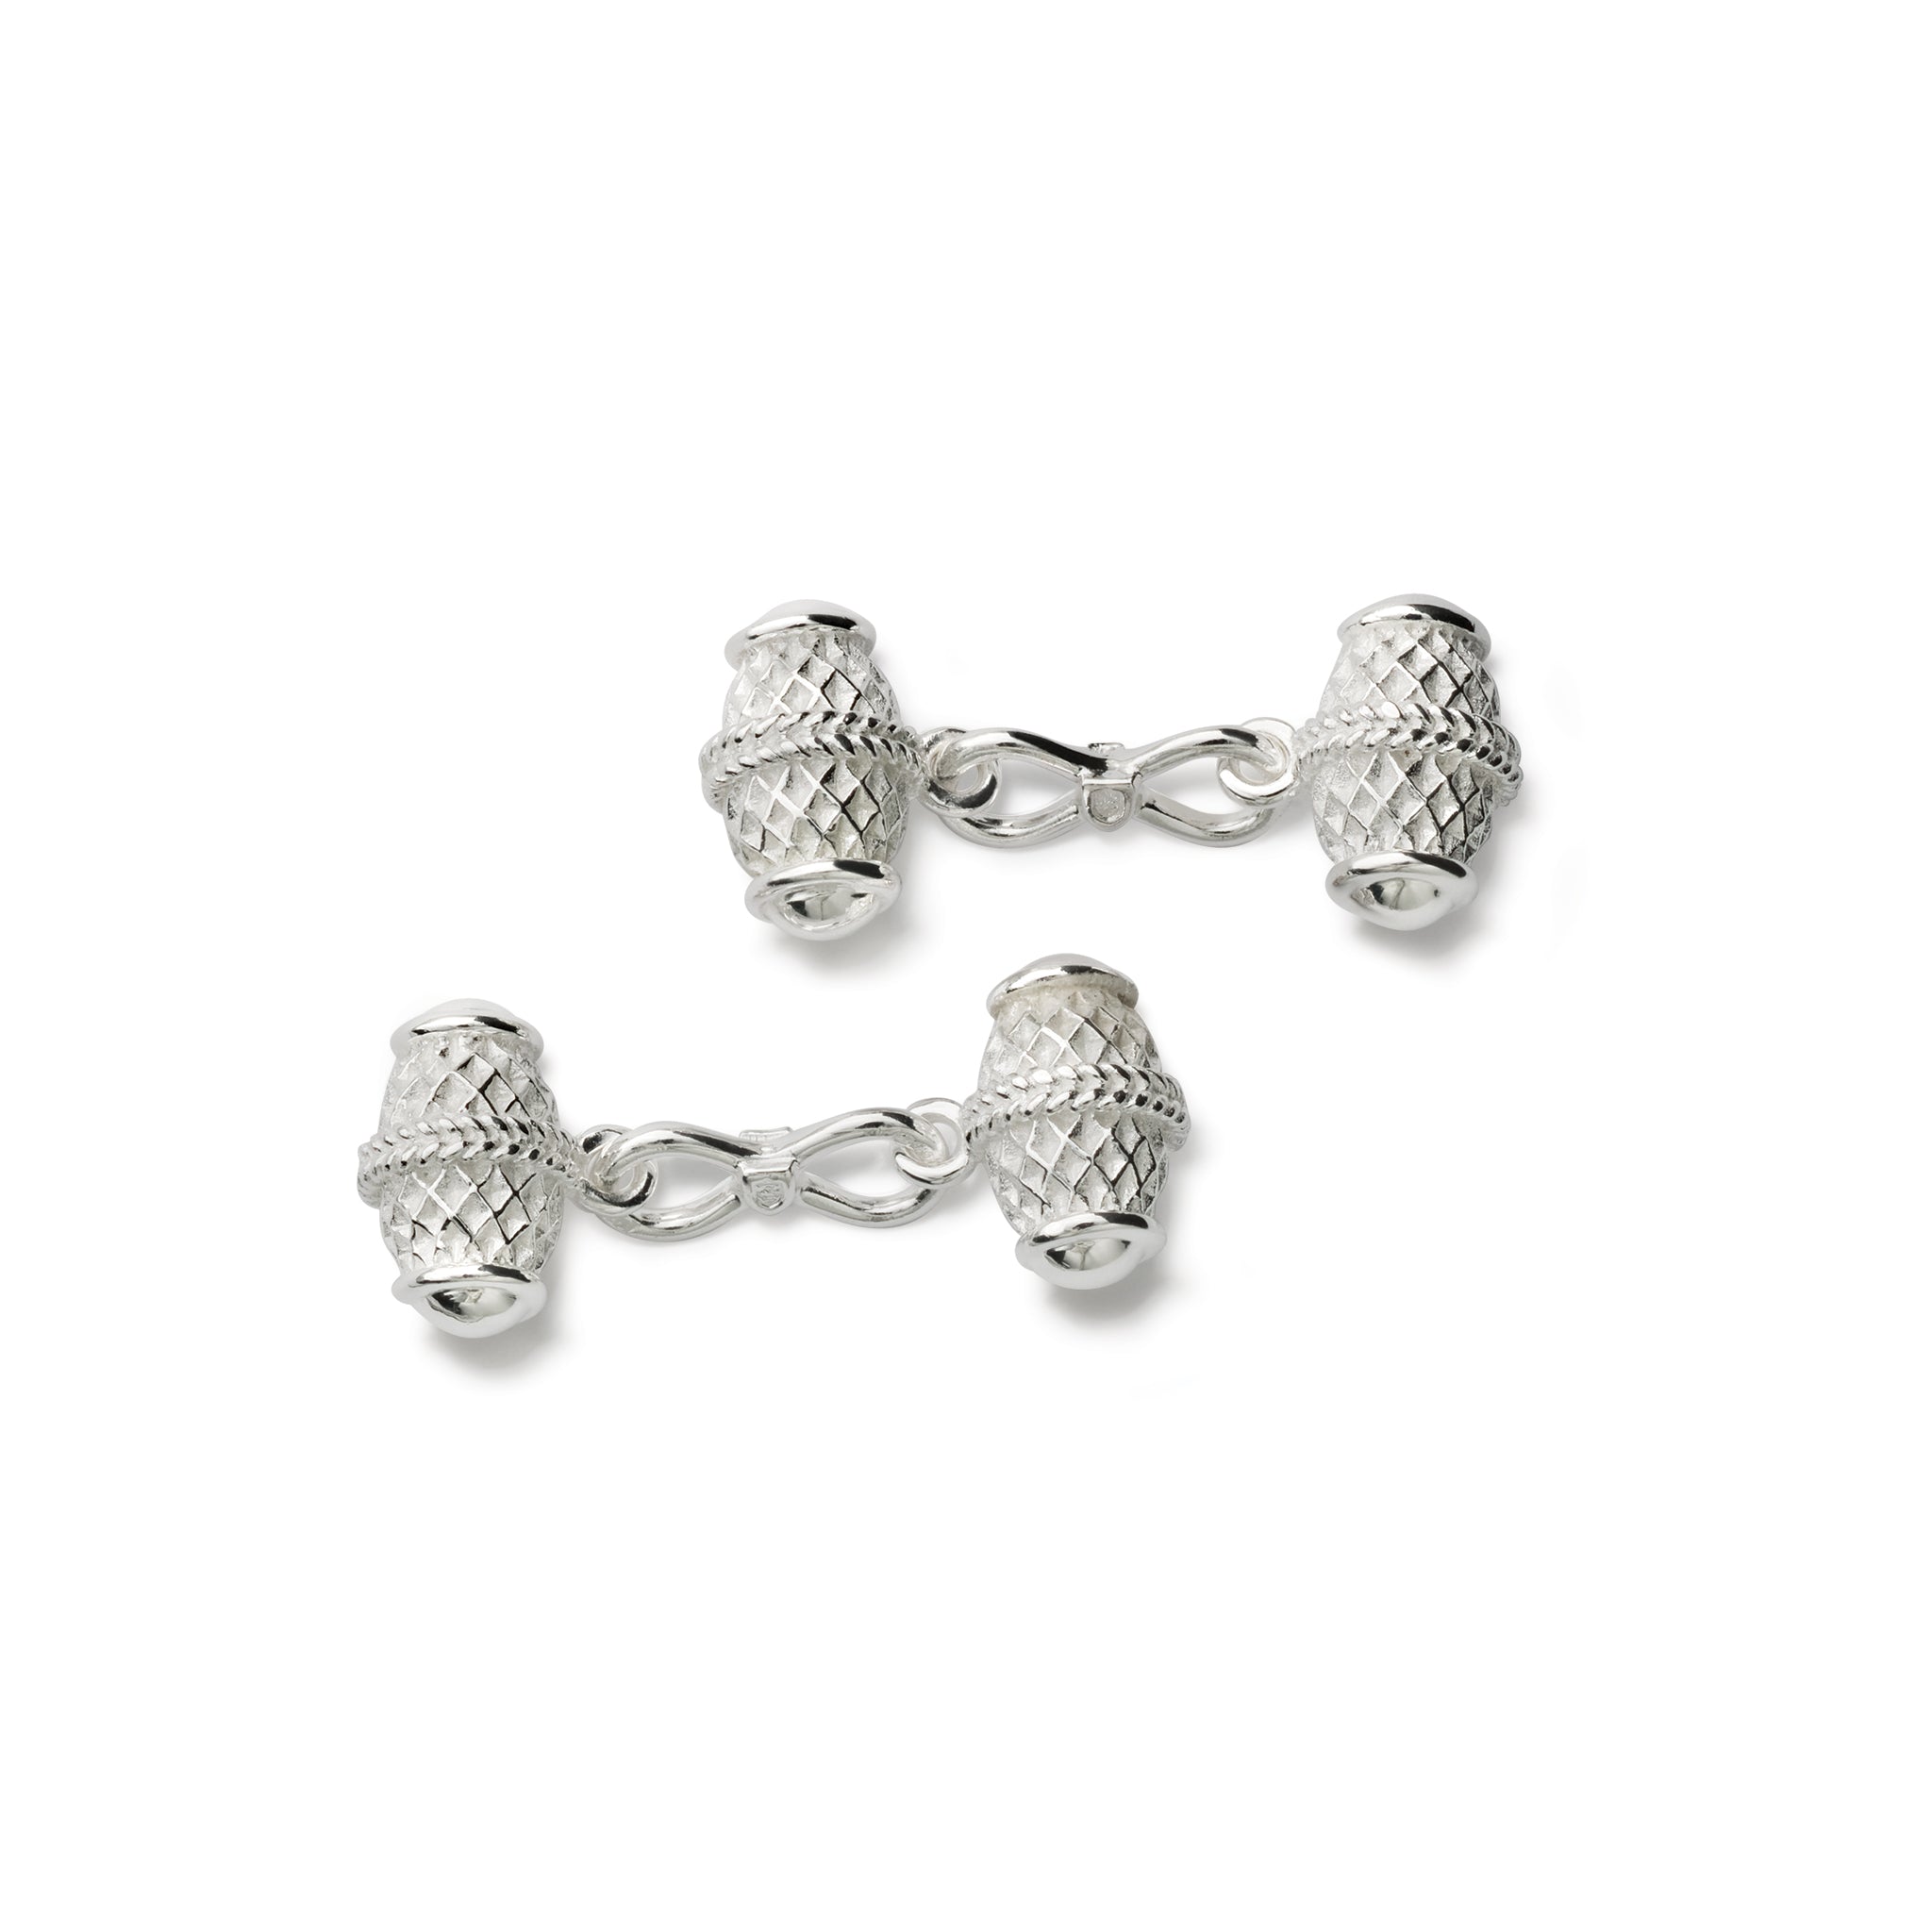 Iguminov Double Ended Cufflinks Silver